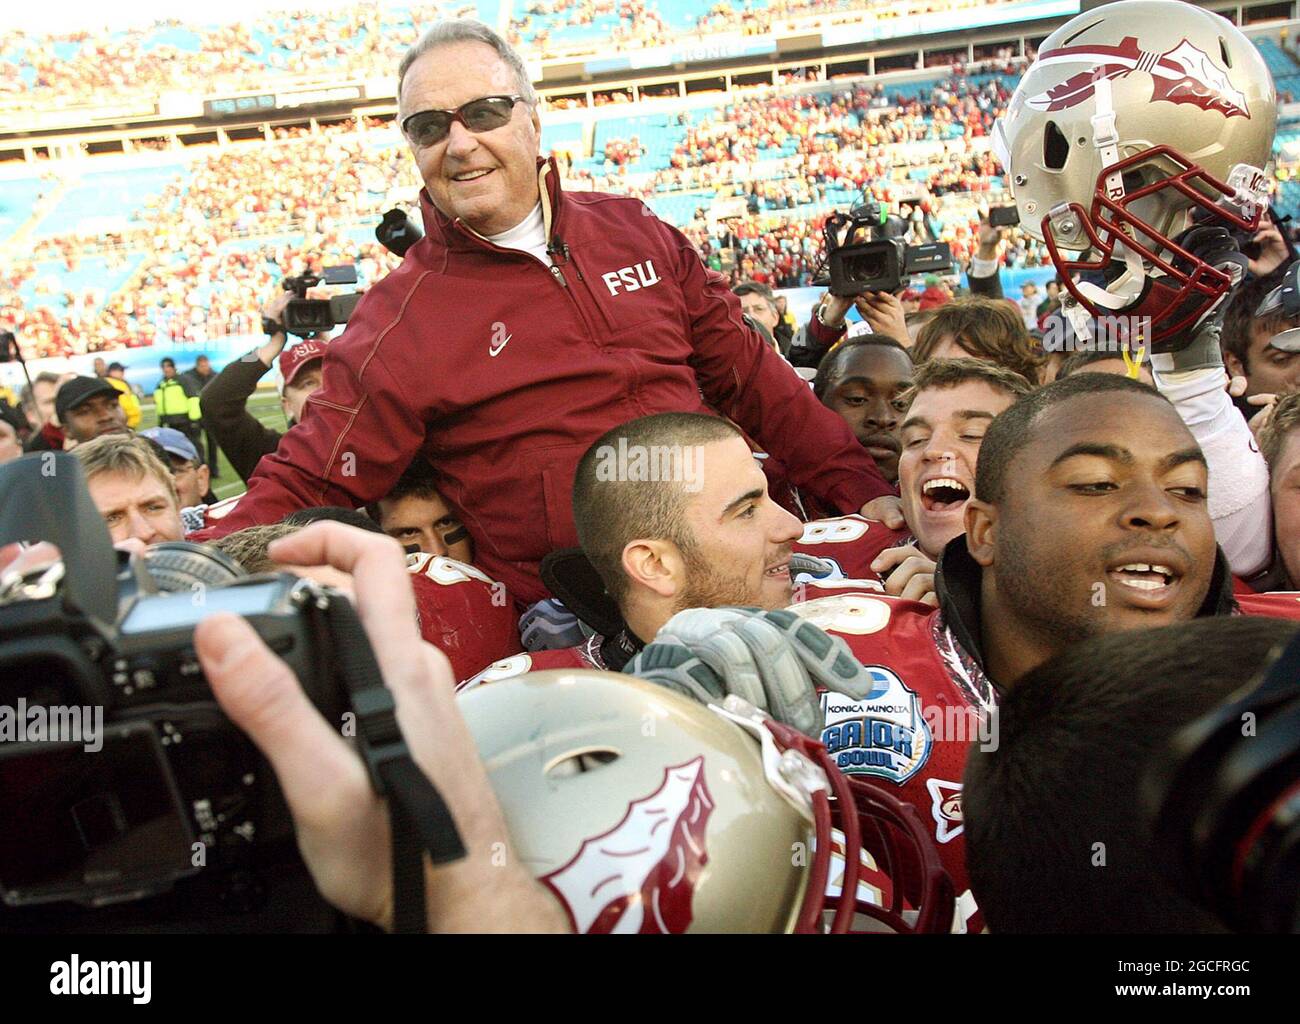 Jacksonville, USA. 01st Jan, 2010. Florida State head coach Bobby Bowden is carried triumphantly on the shoulders of his players after beating West Virginia, 33-21, in the Gator Bowl at Jacksonville Municipal Stadium in Jacksonville, Florida, Friday, January 1, 2010. Bowden died Sunday morning, August 8, 2021. He was 91. (Photo by Stephen M. Dowell/Orlando Sentinel/TNS/Sipa USA) Credit: Sipa USA/Alamy Live News Stock Photo